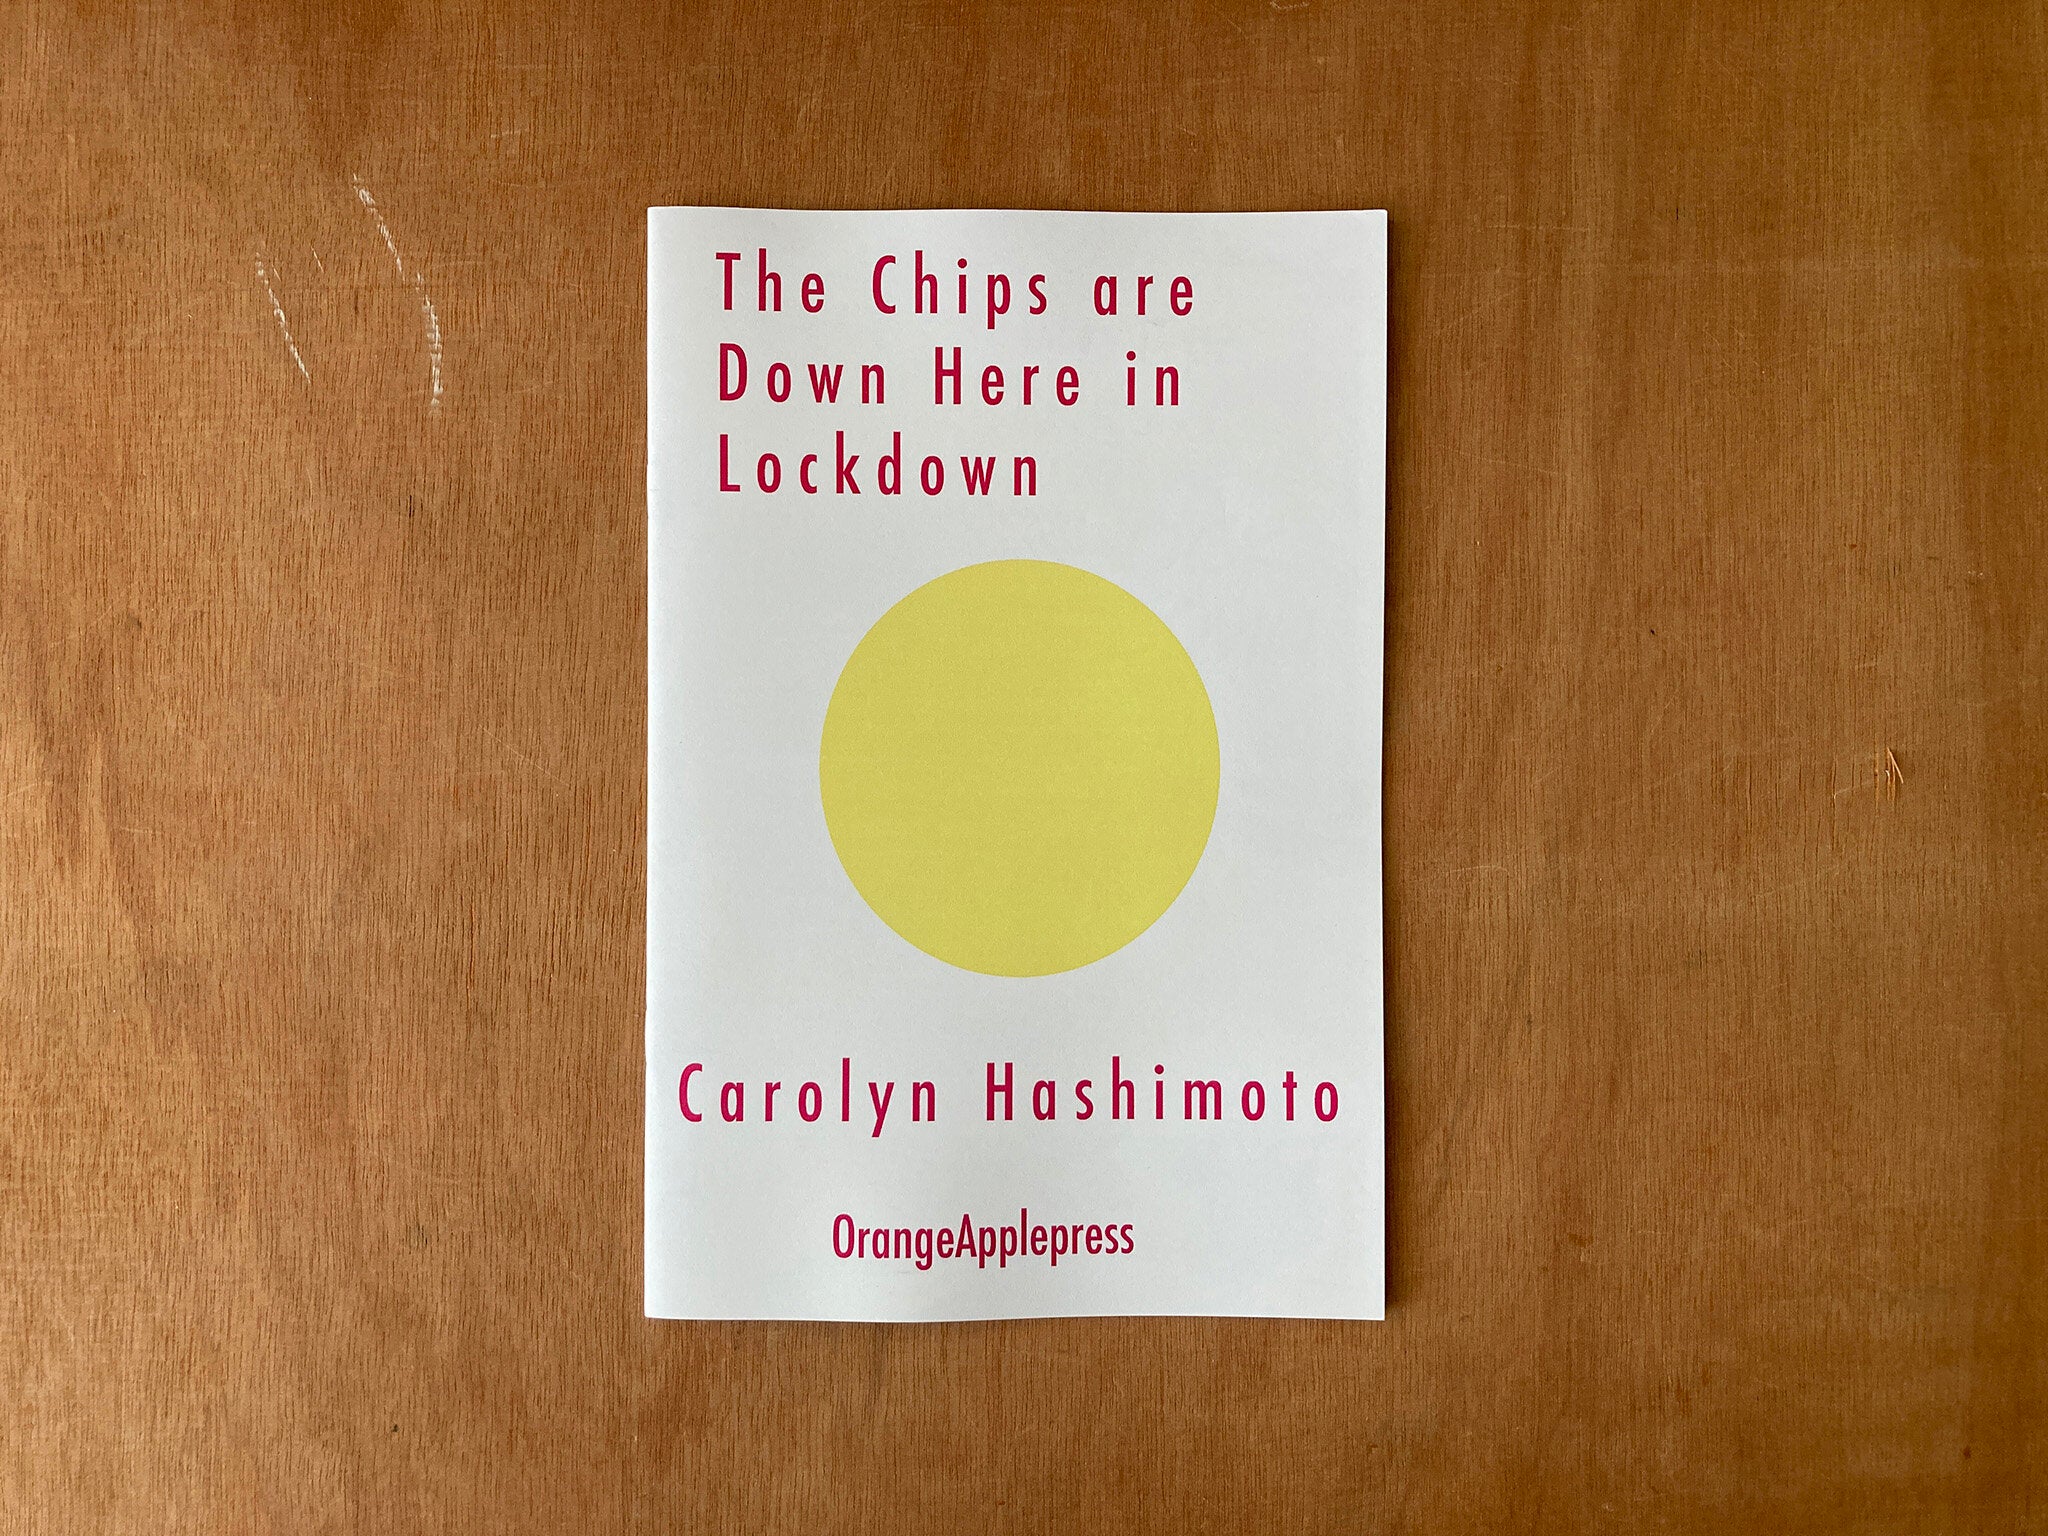 THE CHIPS ARE DOWN HERE IN LOCKDOWN by Carolyn Hashimoto